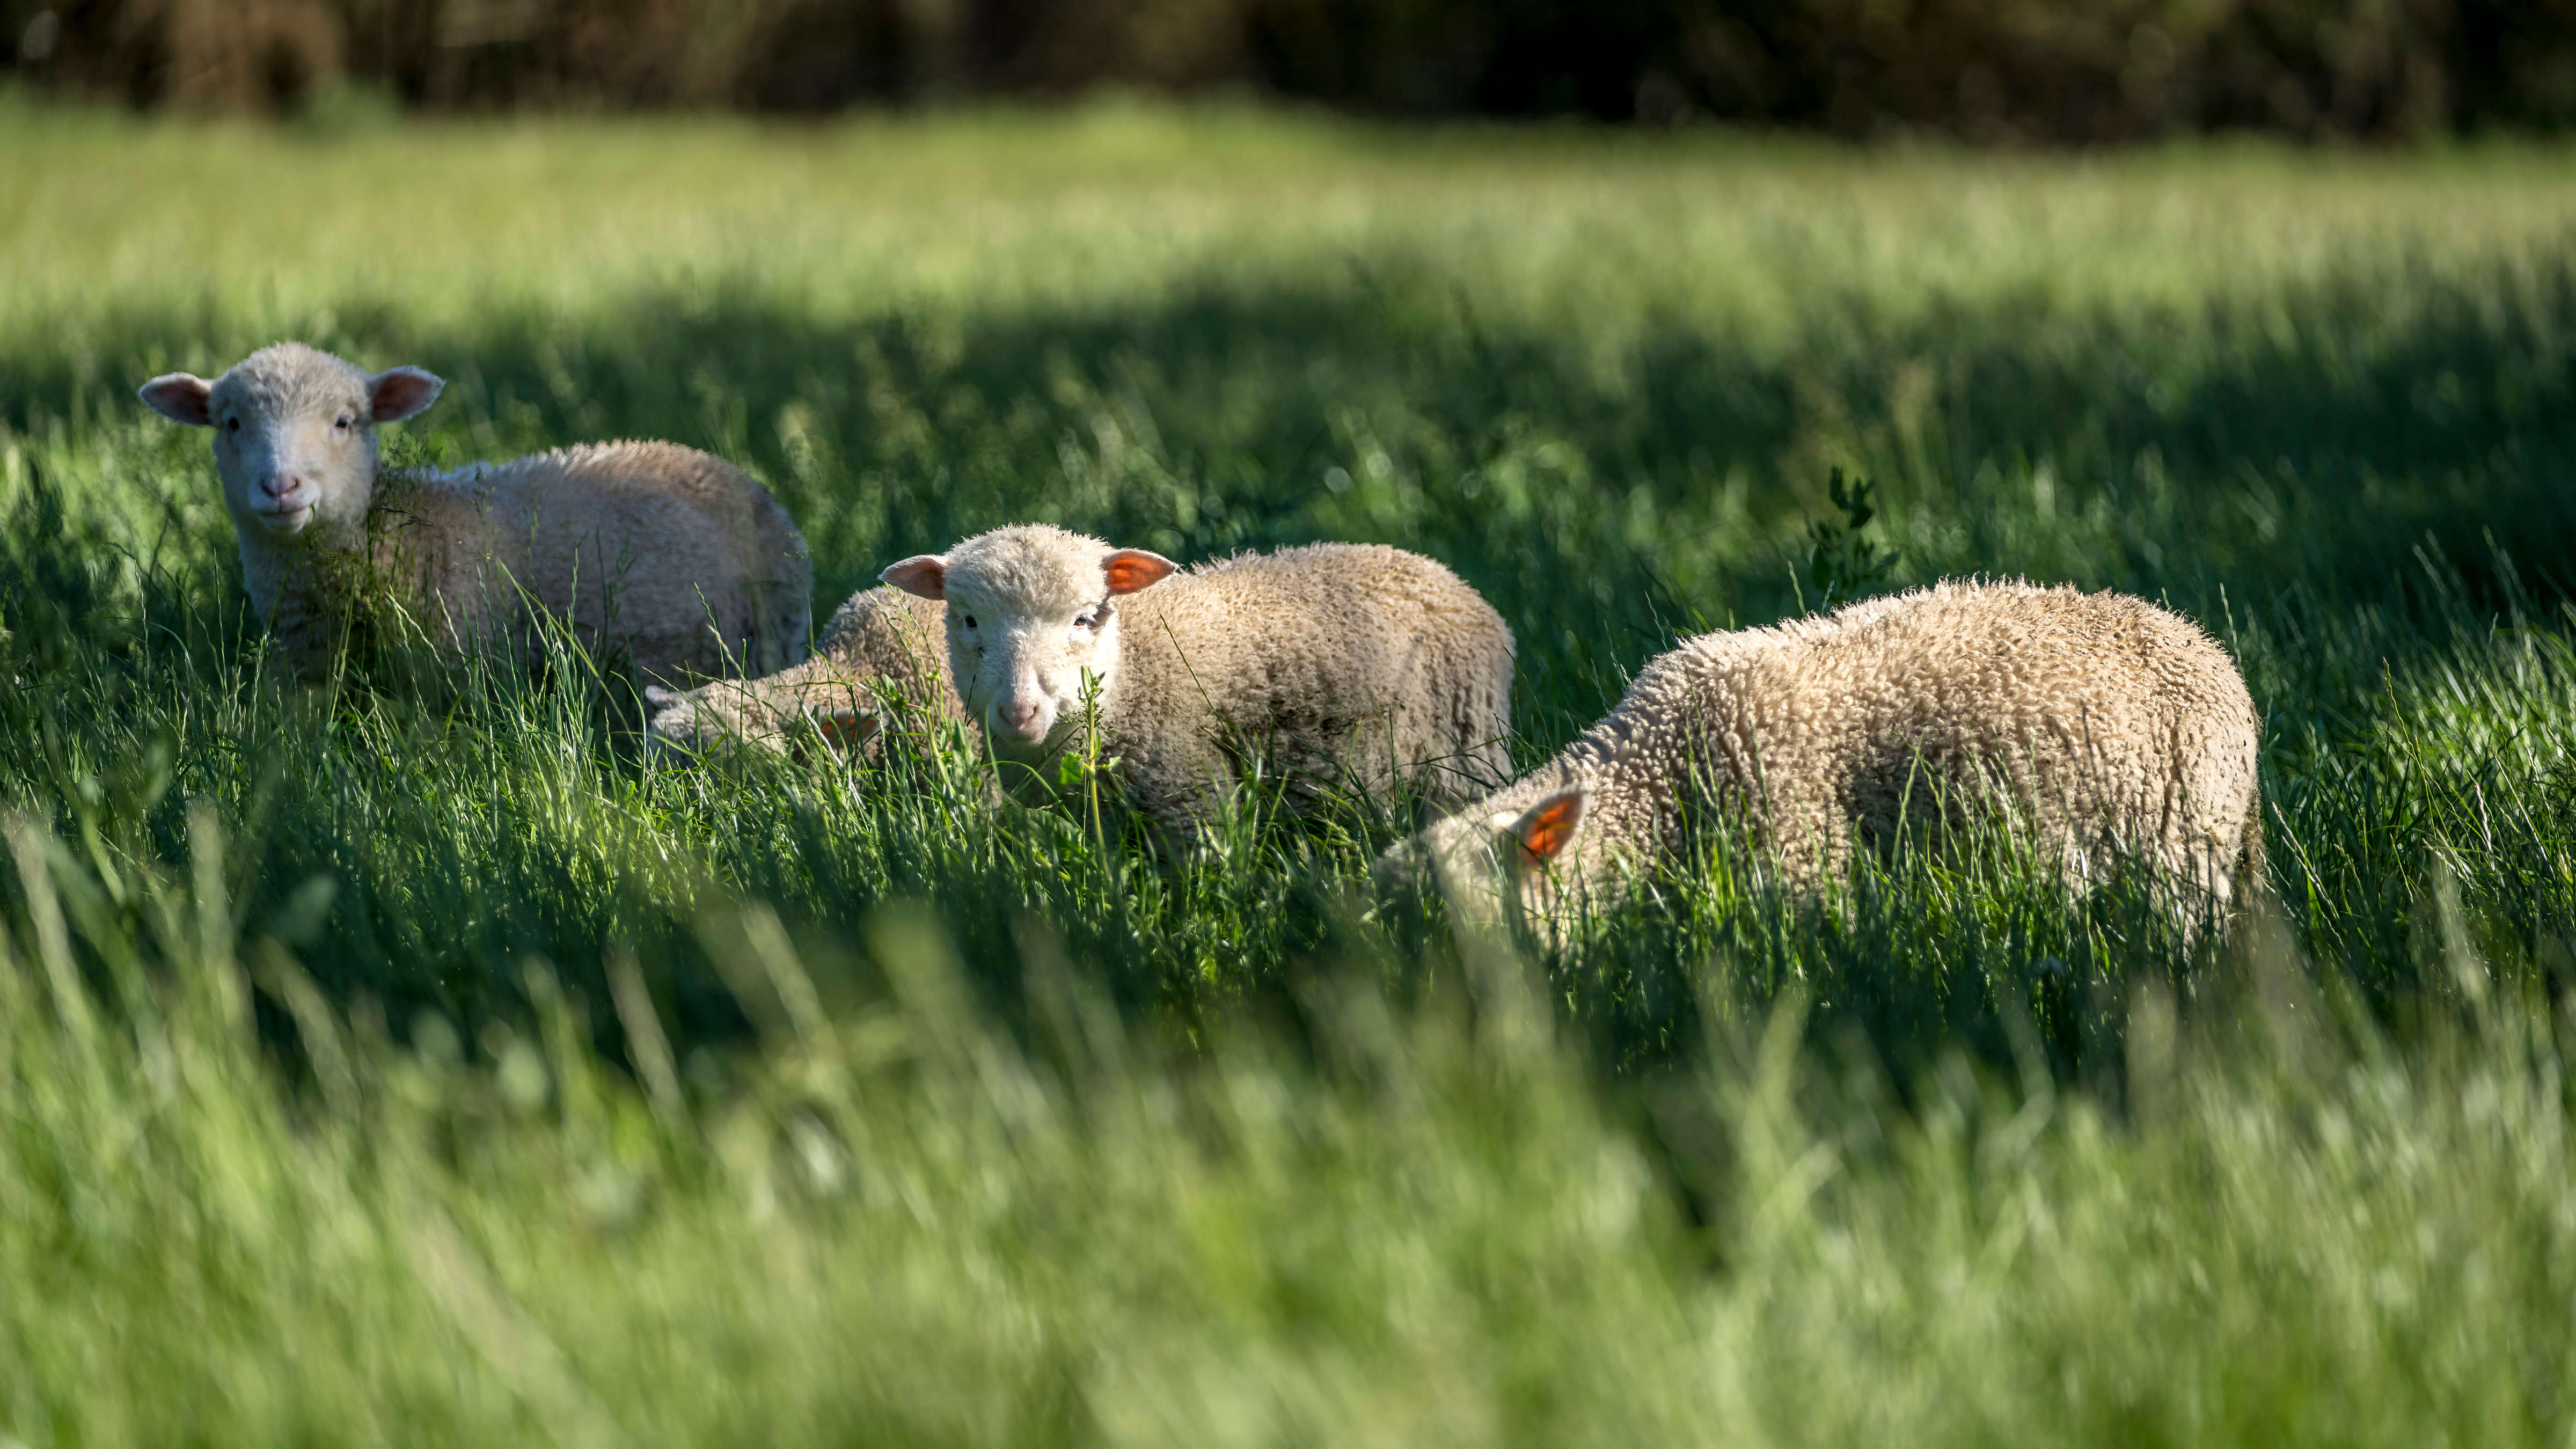 Four young lambs stand in a field of long grass, two of them are eating while the other two are looking at the camera. Photo: Rob Burnett.